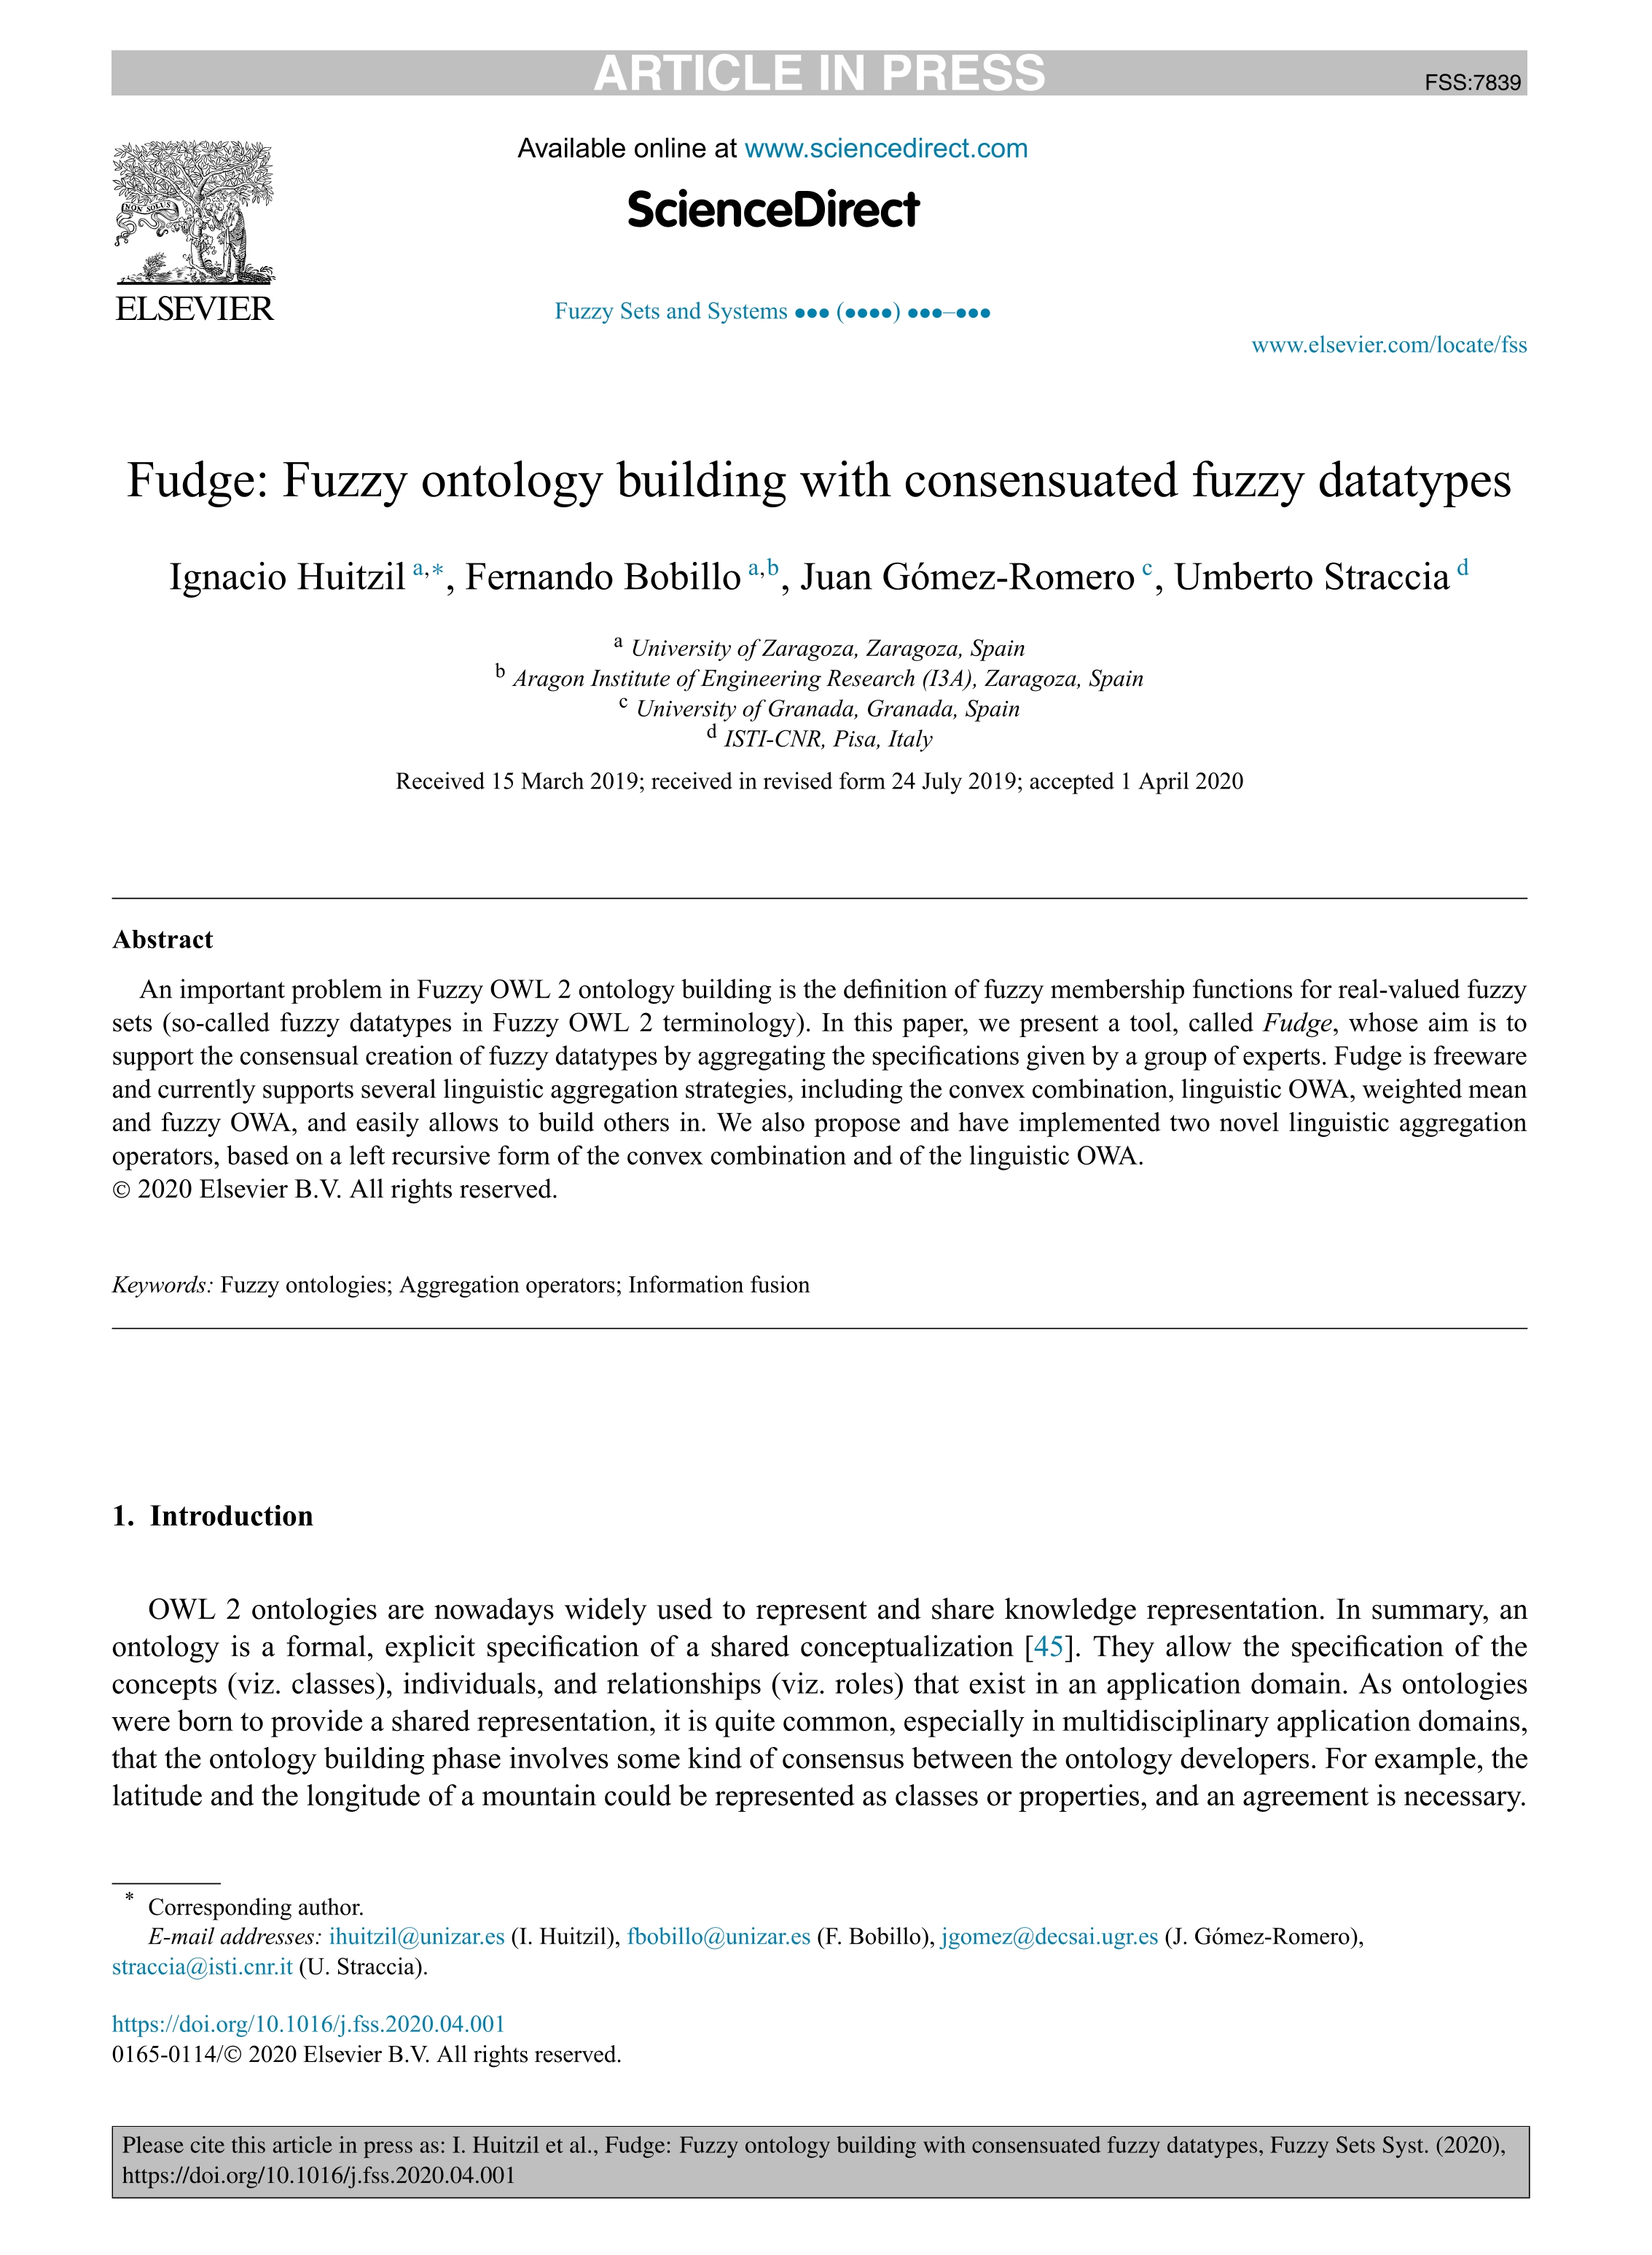 Fudge: Fuzzy ontology building with consensuated fuzzy datatypes